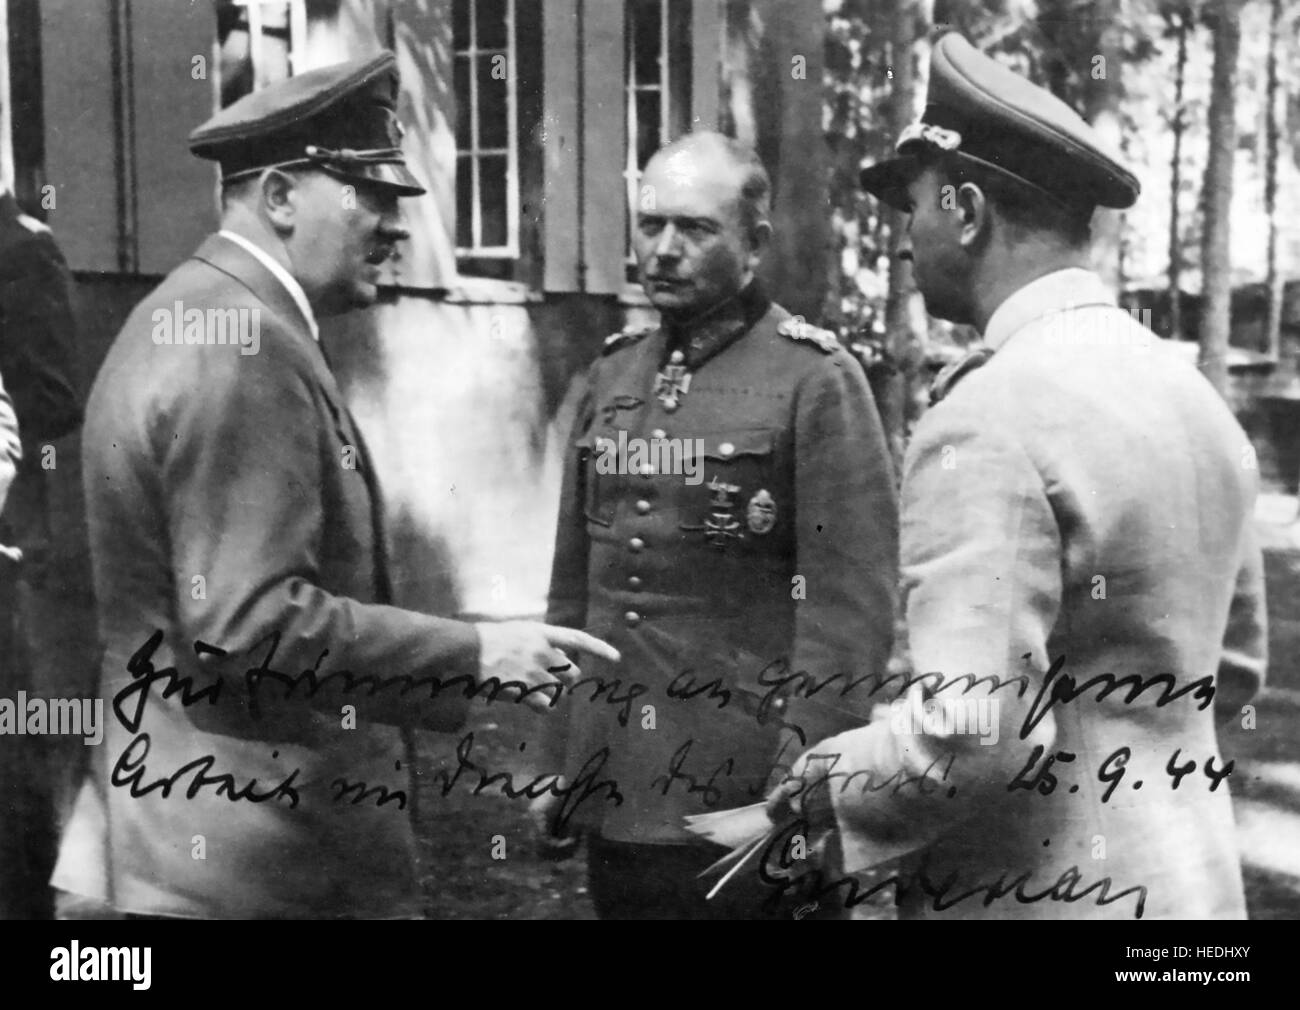 HEINZ GUDERIAN (1888-1954) German Panzer leader (centre) with Hitler at left and Hermann Fegelin. Autographed photo given by Guderian to Fegelein on 15 September 1944 with the words 'In memory of joint effort in the service of our Fuehrer' Stock Photo